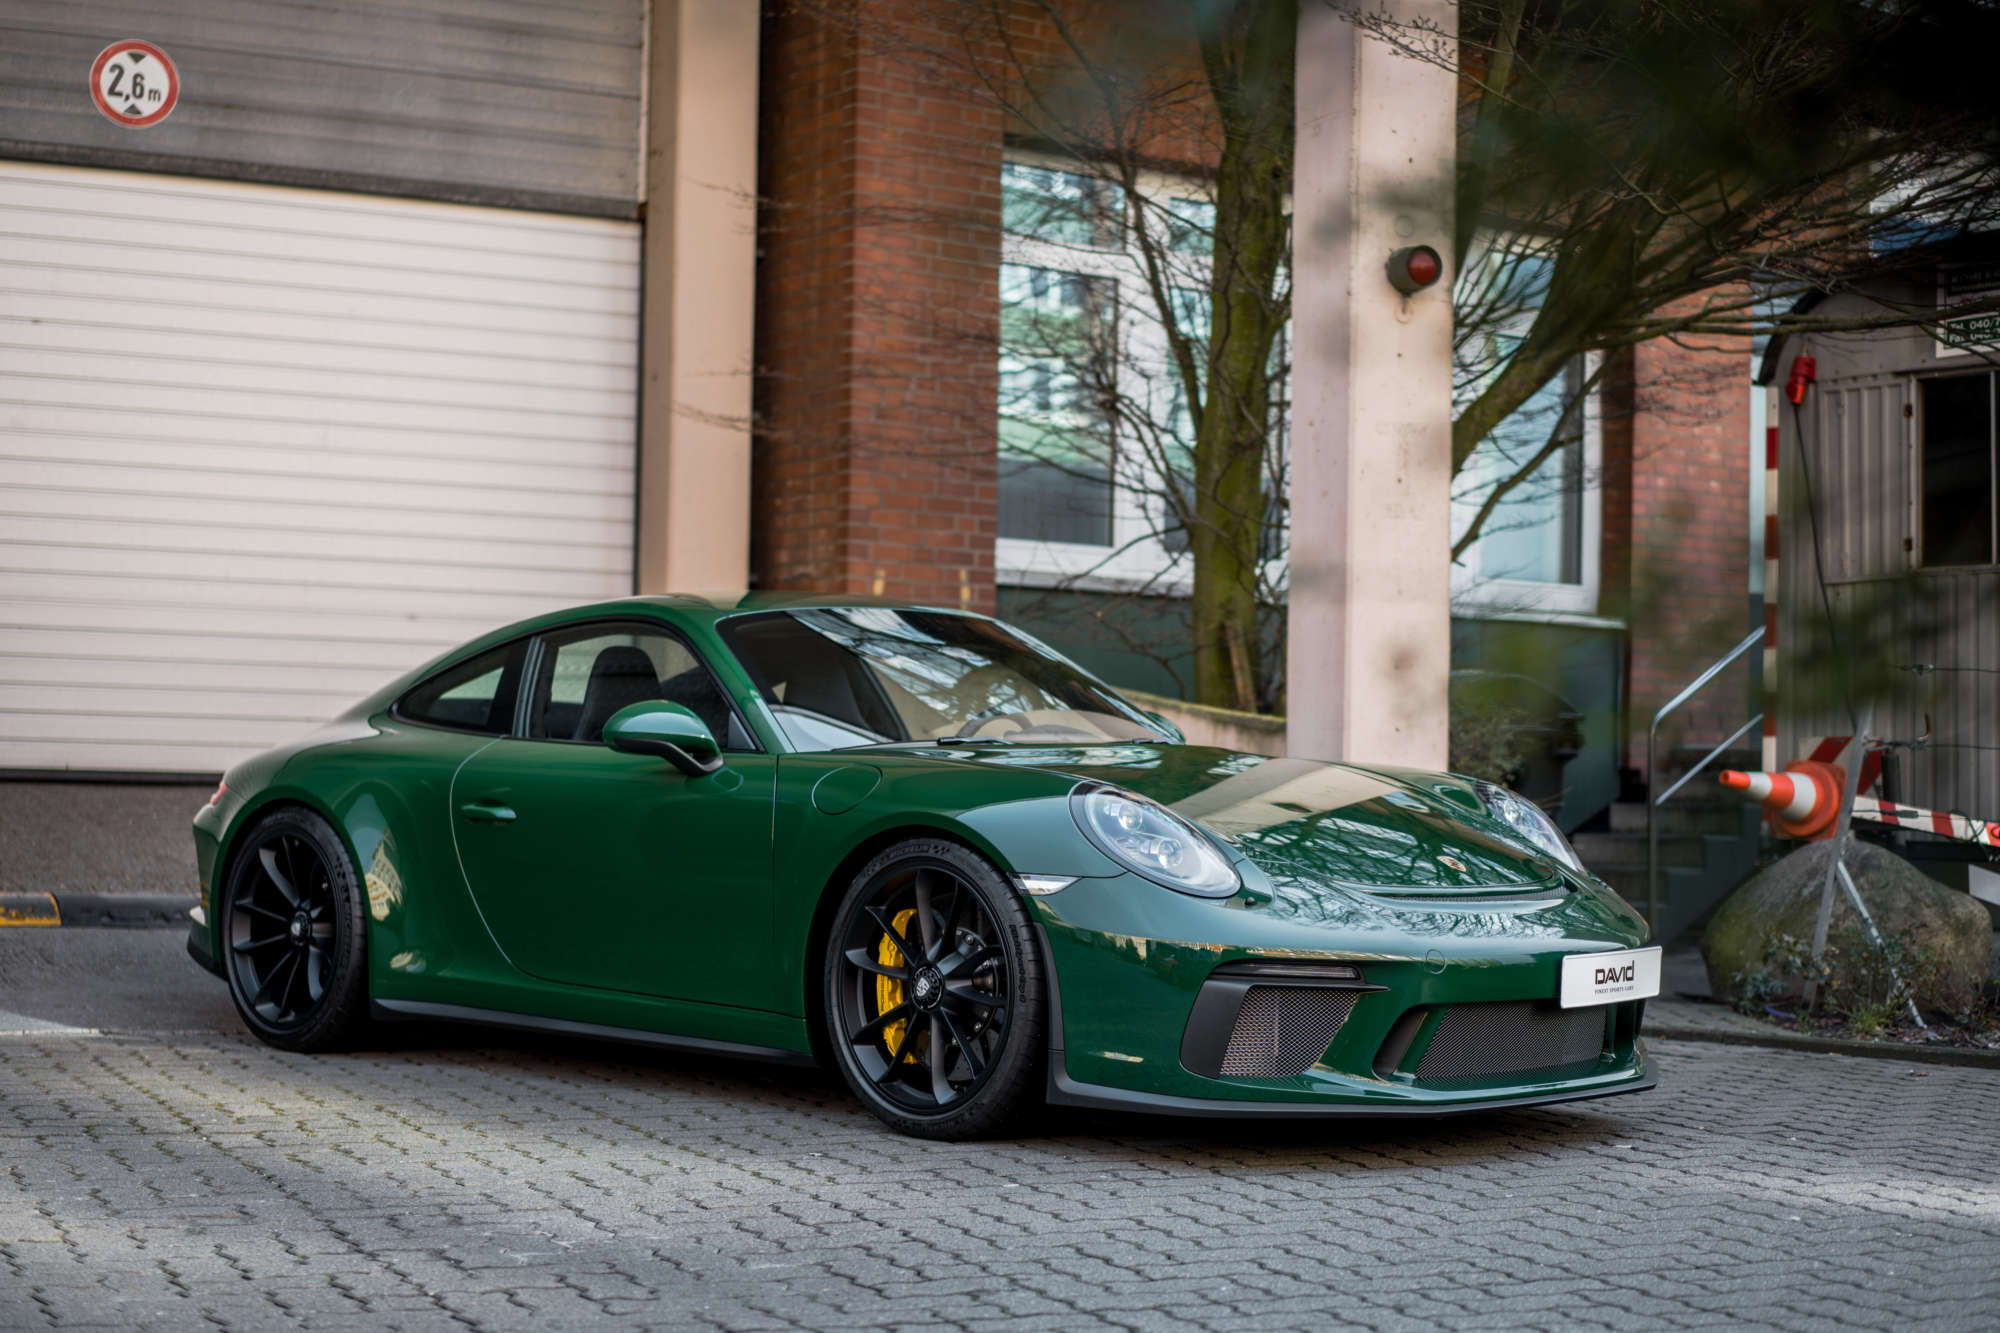 2018 Porsche GT3 - WTB- Looking for a Oak Green, Brewster Green or Macadamia Brown 911 GT3 Touring. - New or Used - Los Angeles, CA 90049, United States